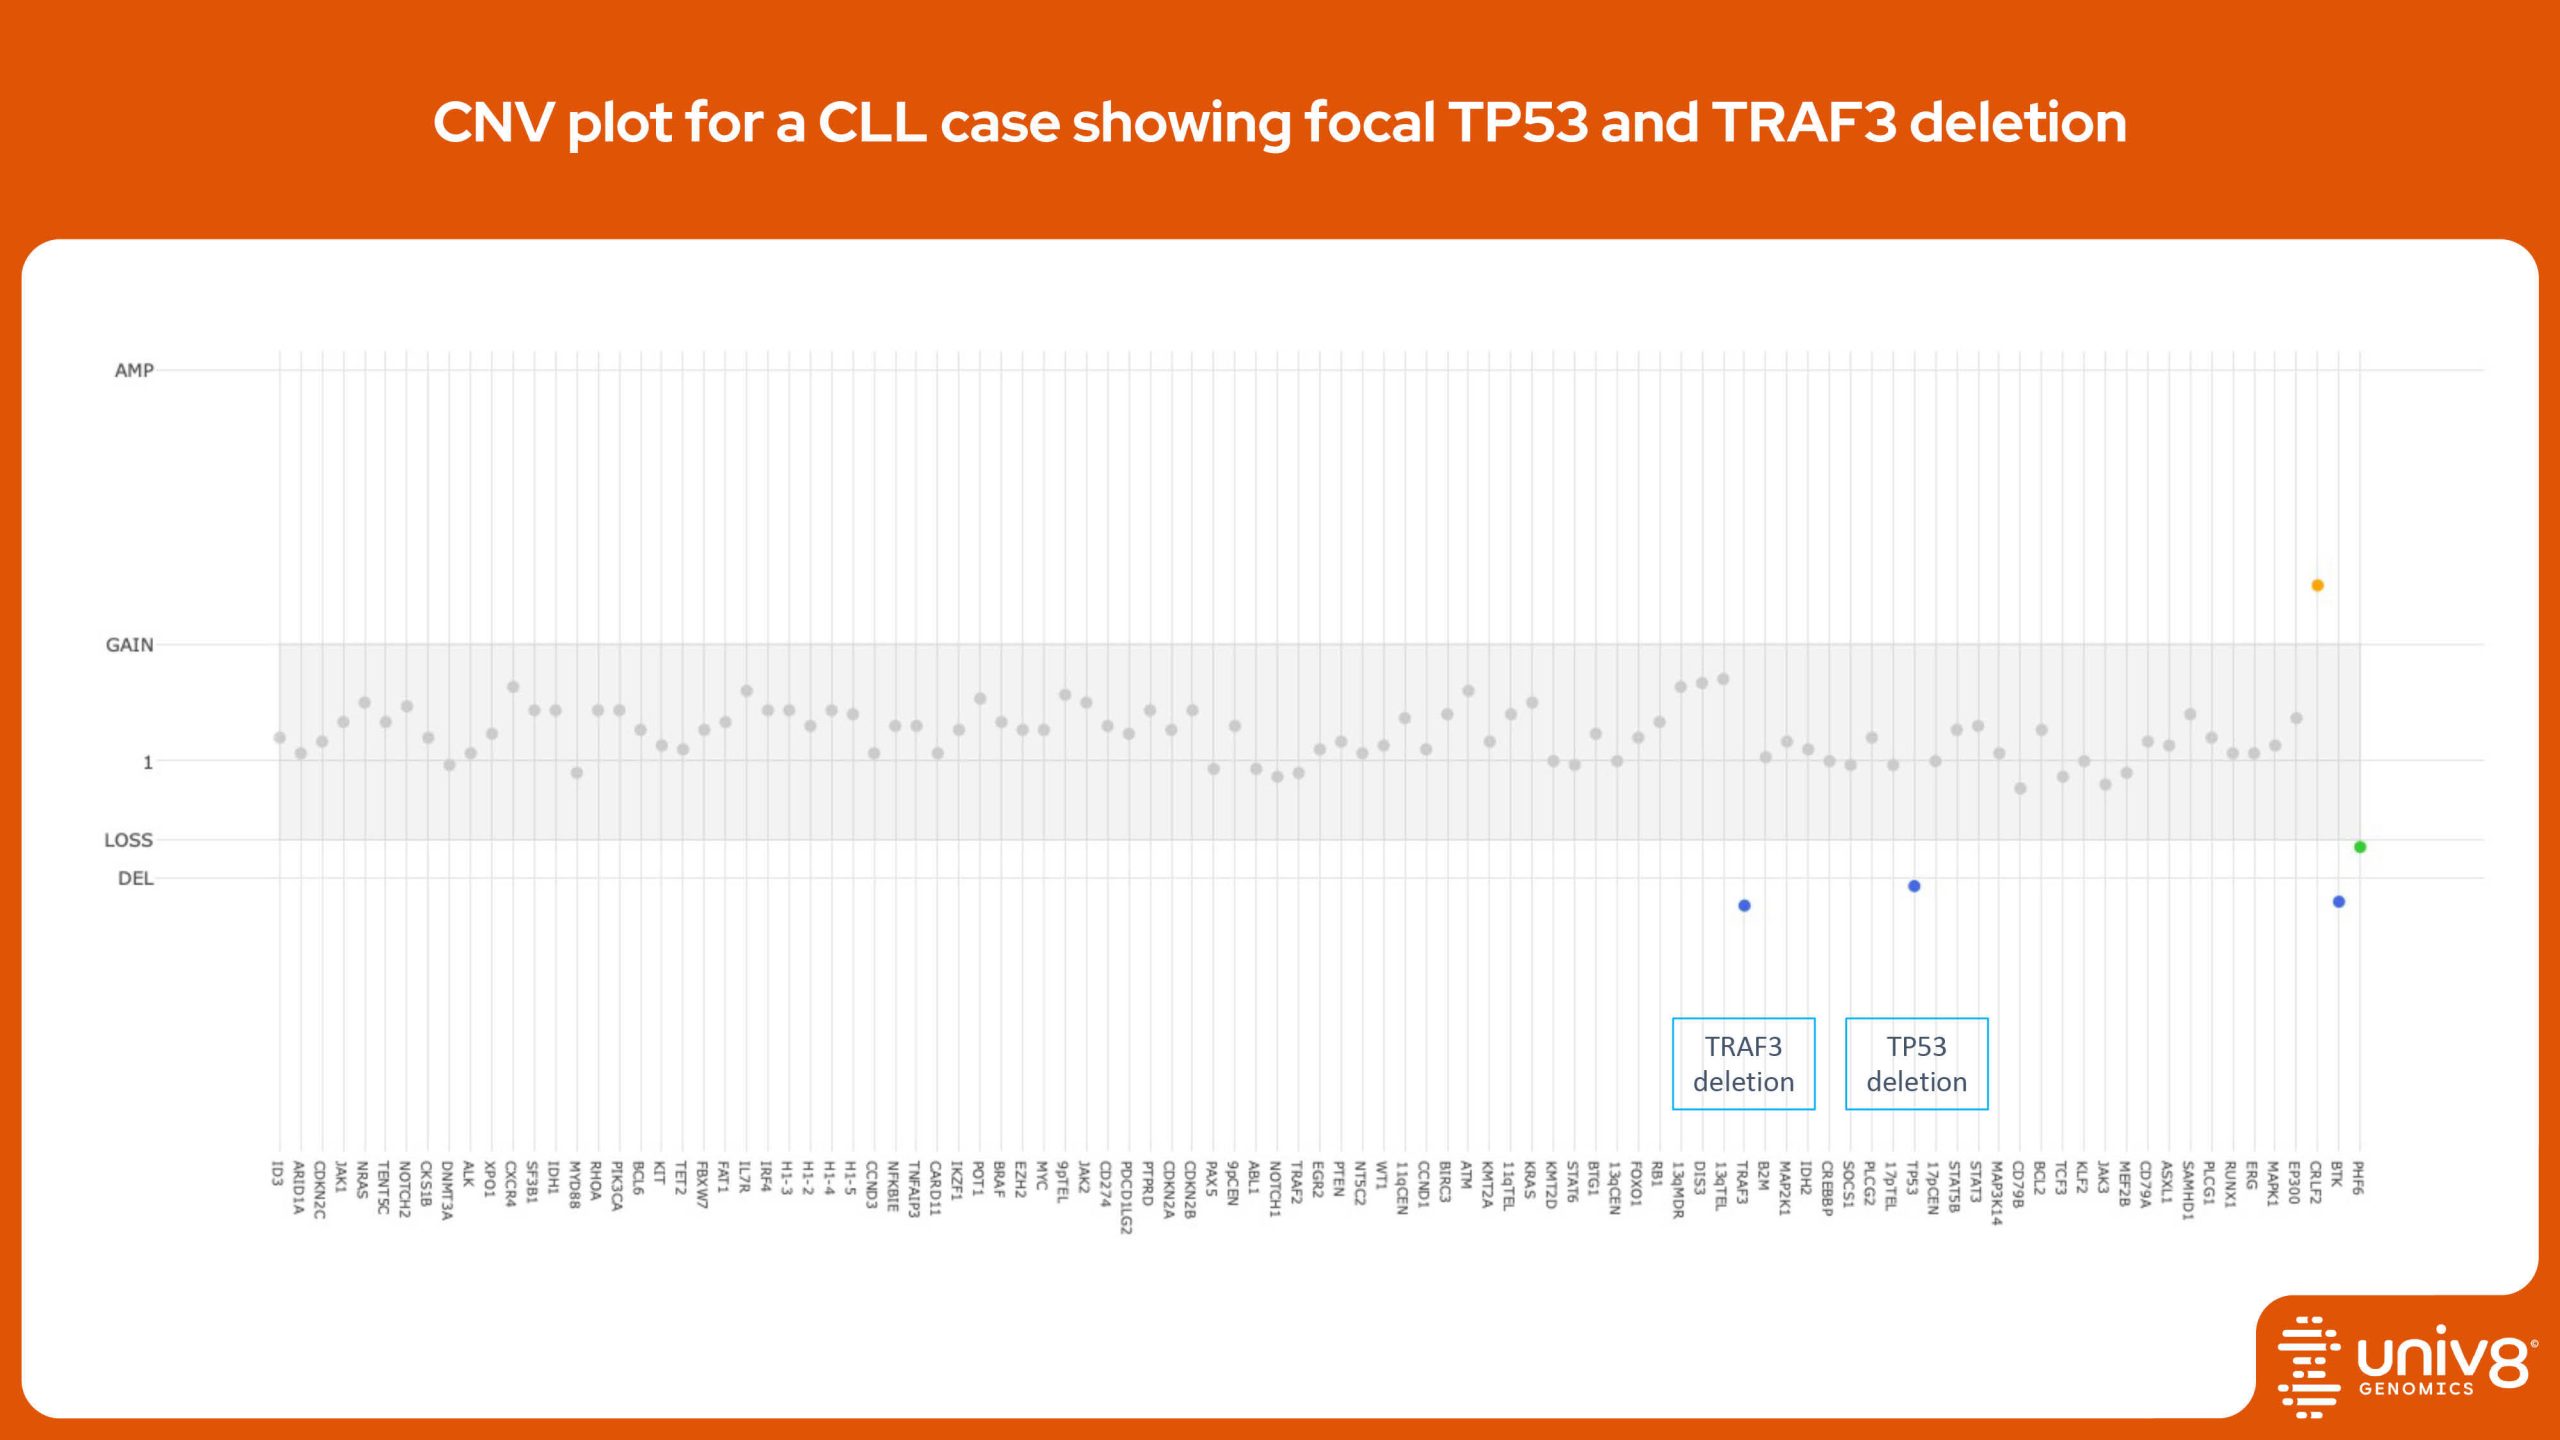 CNA plot for a CLL case showing focal TP53 and TRAF3 deletion